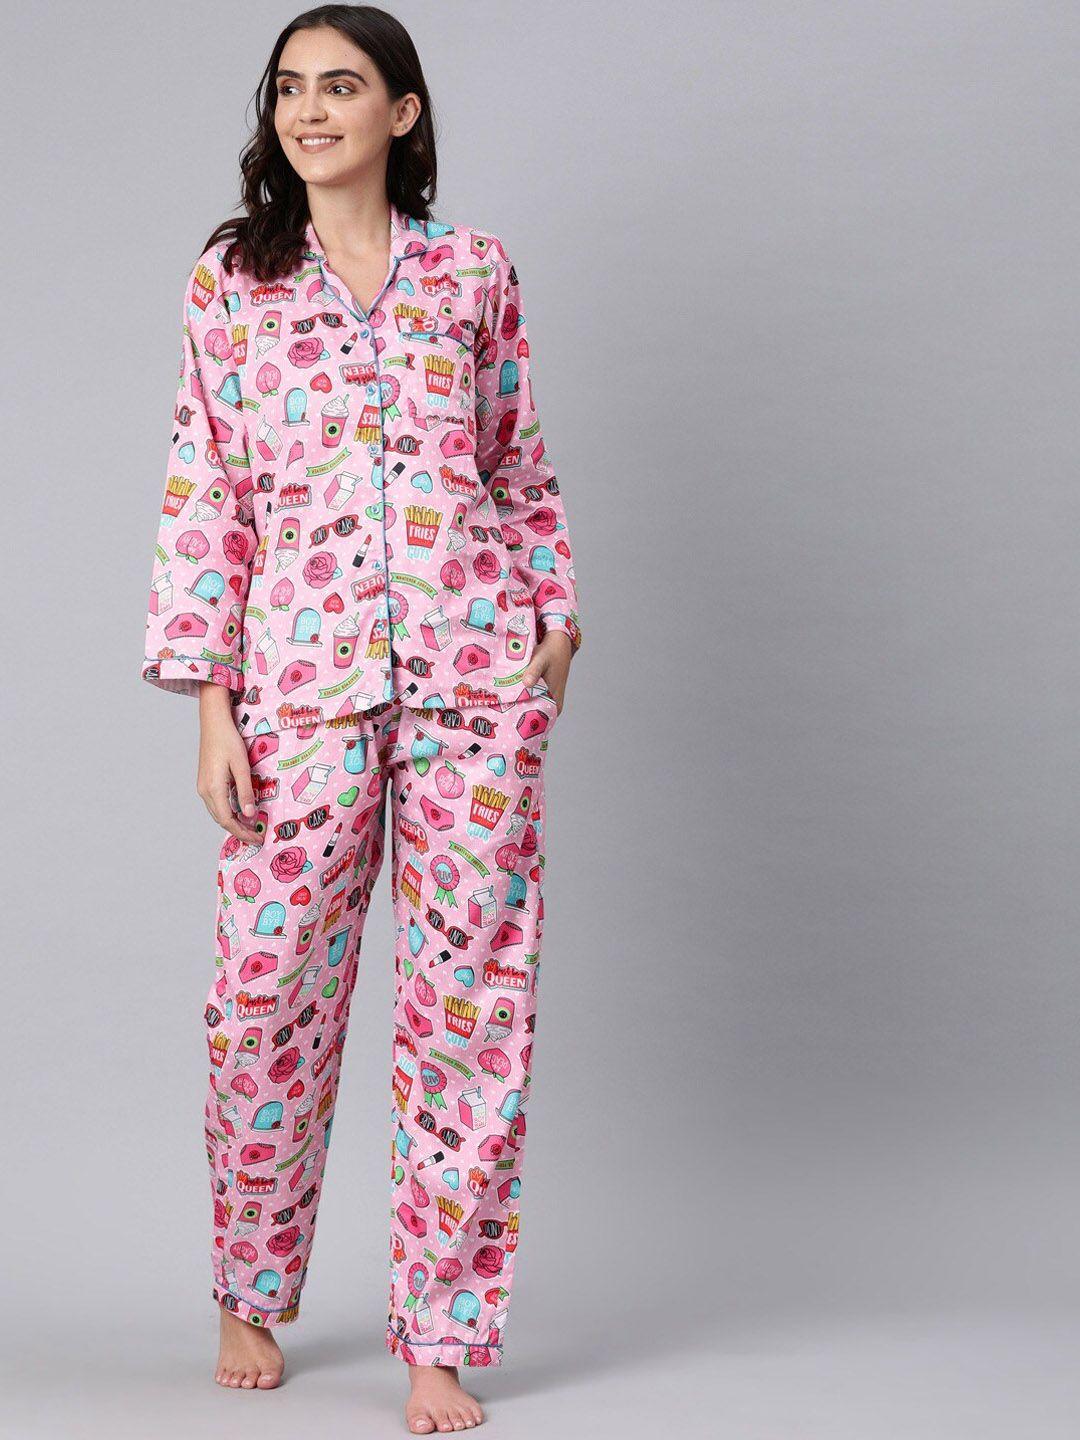 pyjama-party-women-pink-&-red-conversational-printed-pure-cotton-night-suit